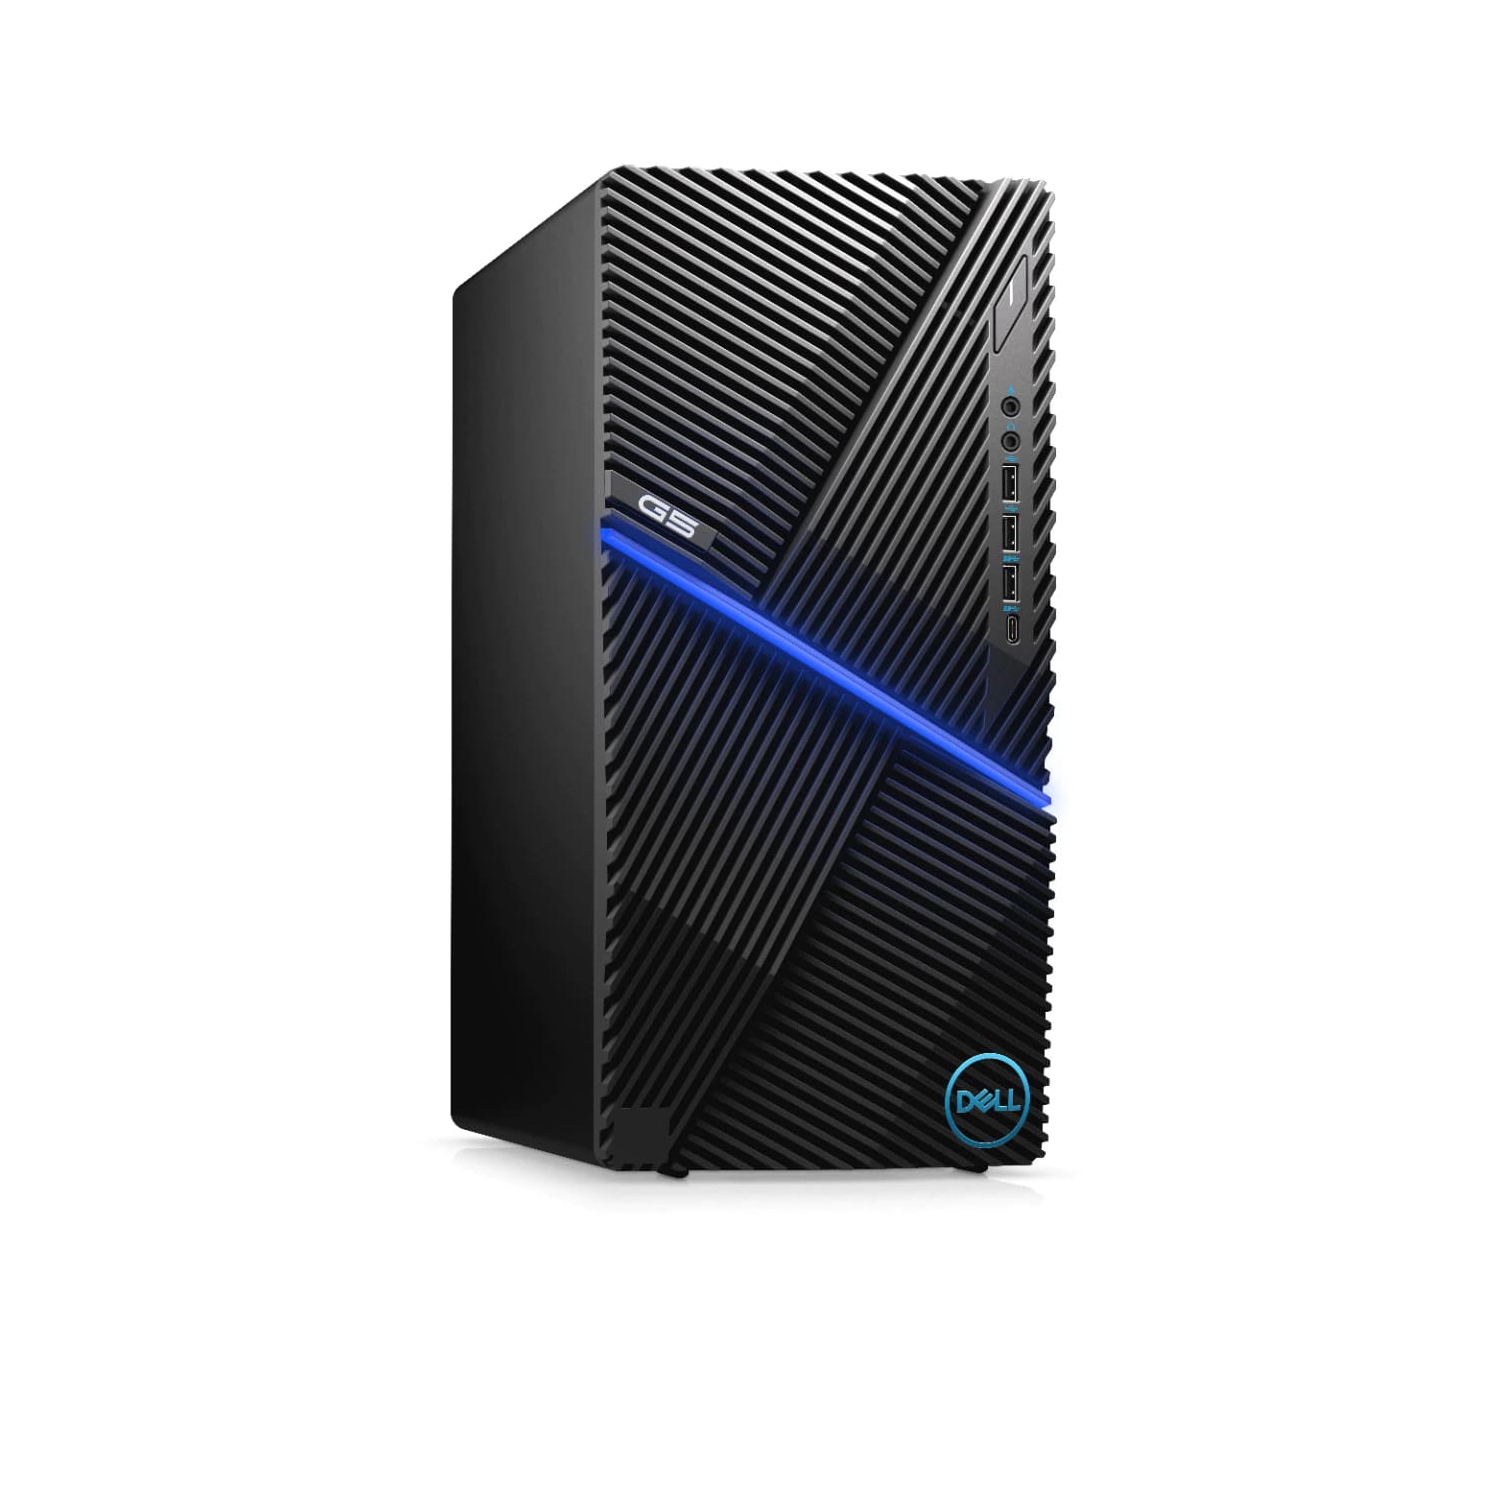 Refurbished (Excellent) - Dell G5 5000 Gaming Desktop (2020), Core i7, 2TB HDD + 256GB SSD, 32GB RAM, 2060 SUPER, 8 Cores @ 5.1 GHz, 10th Gen CPU Certified Refurbished